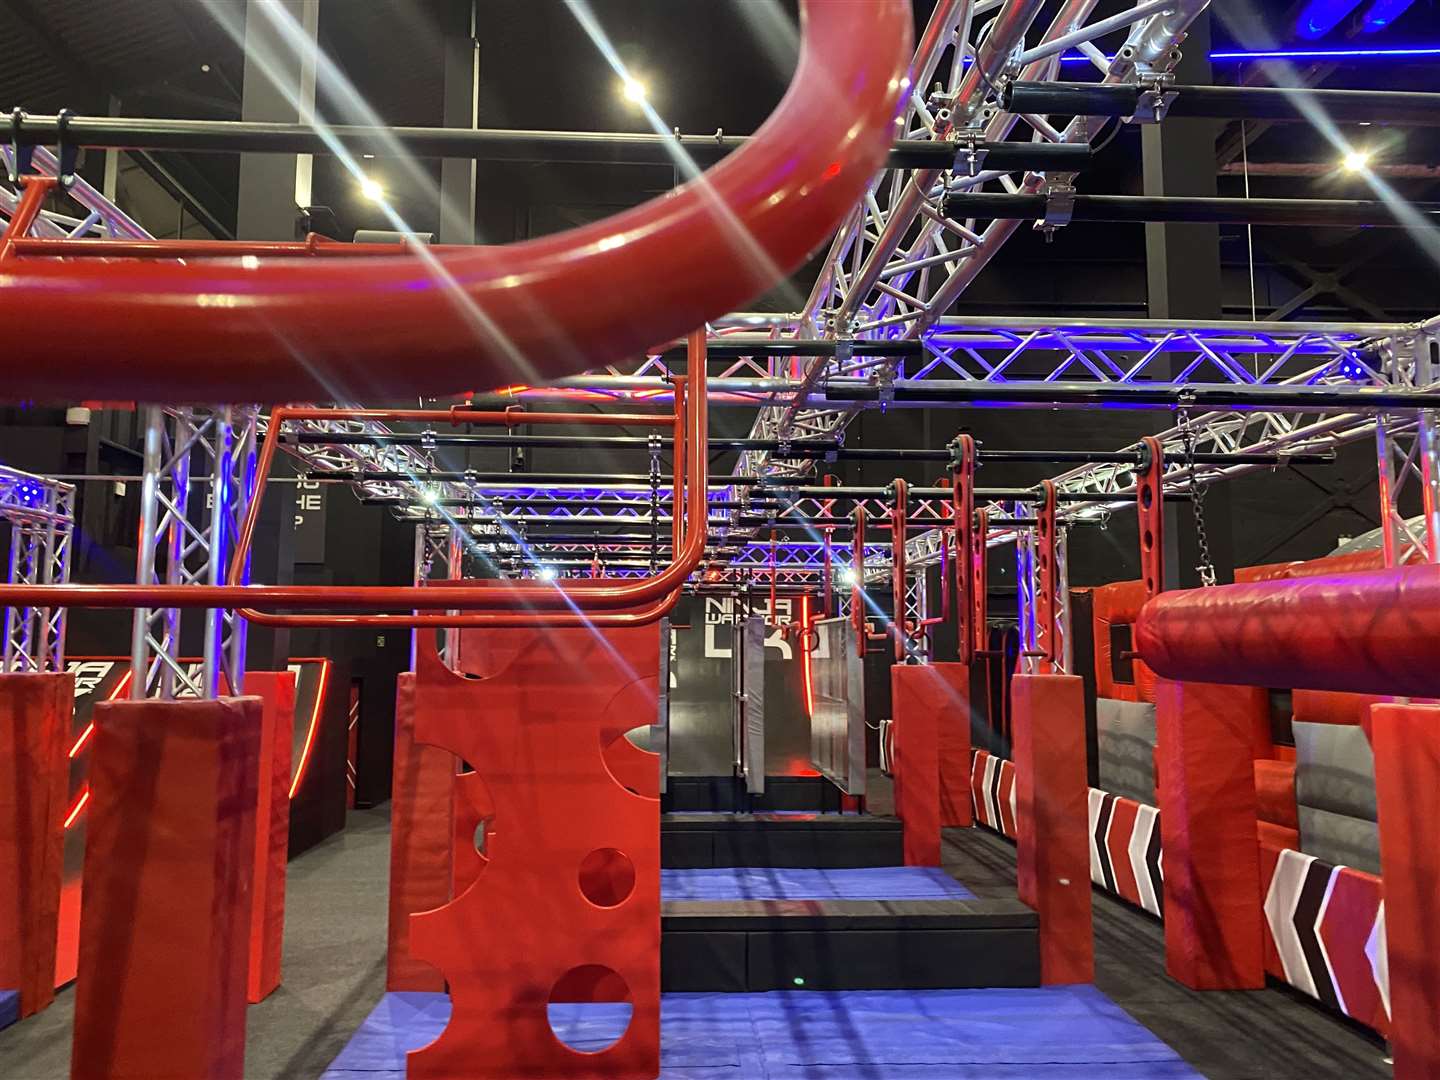 Ninja Warrior indoor obstacle course based on ITV show opens at